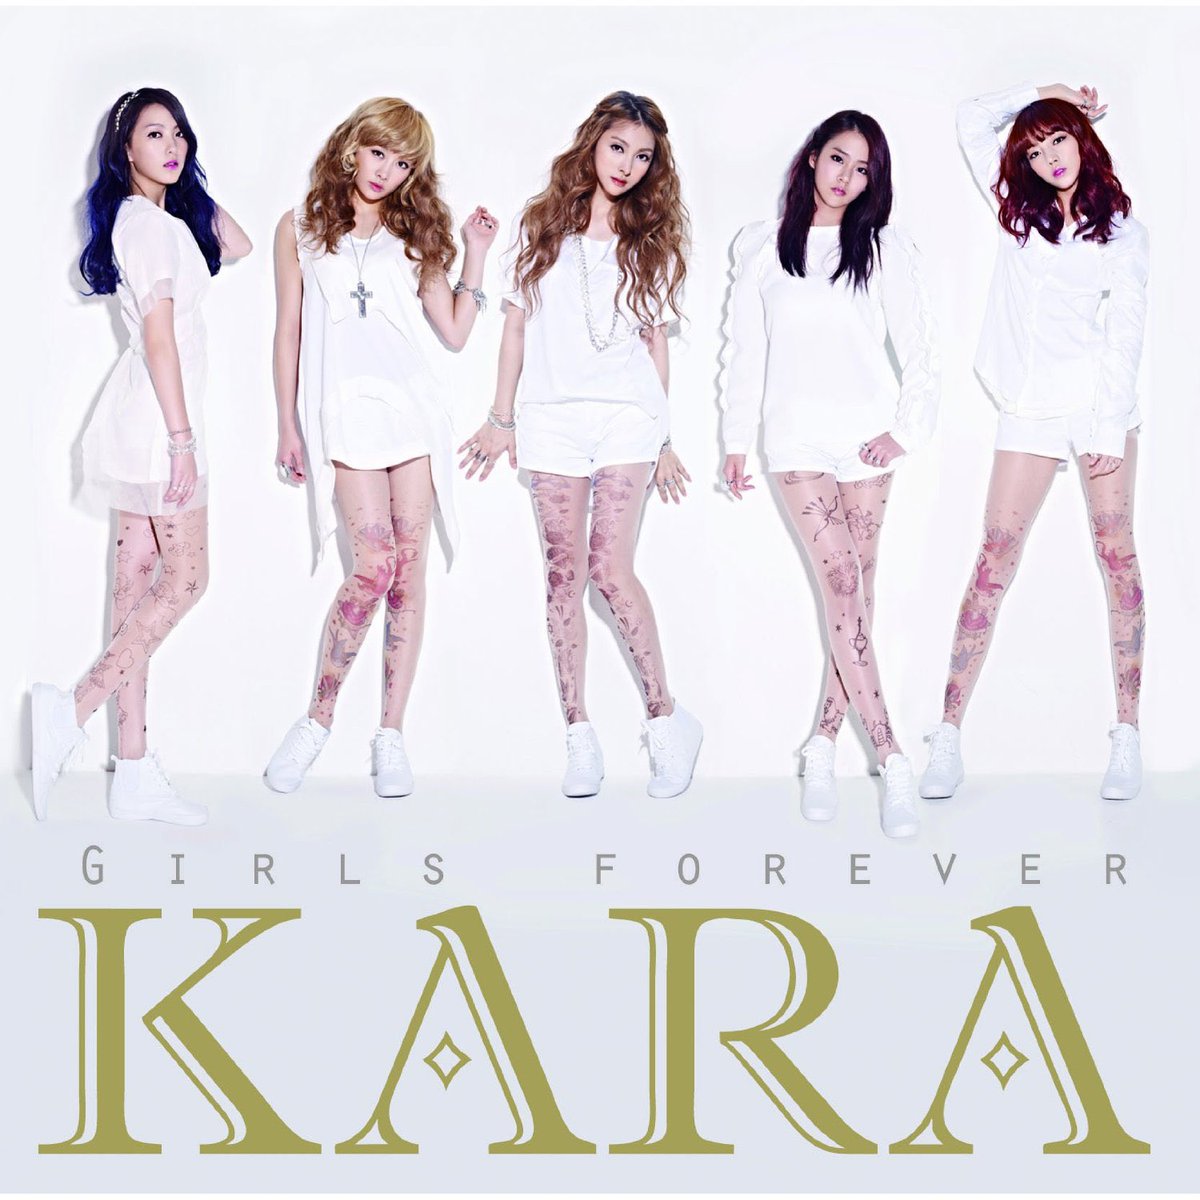 On Nov 14th, KARA released their 3rd Japanese album Girls Forever with singles Speed Up/Girls Power & Electric Boy. It debuted on Oricon's Weekly Album Chart at number two with first week sales of 73,224 copies.